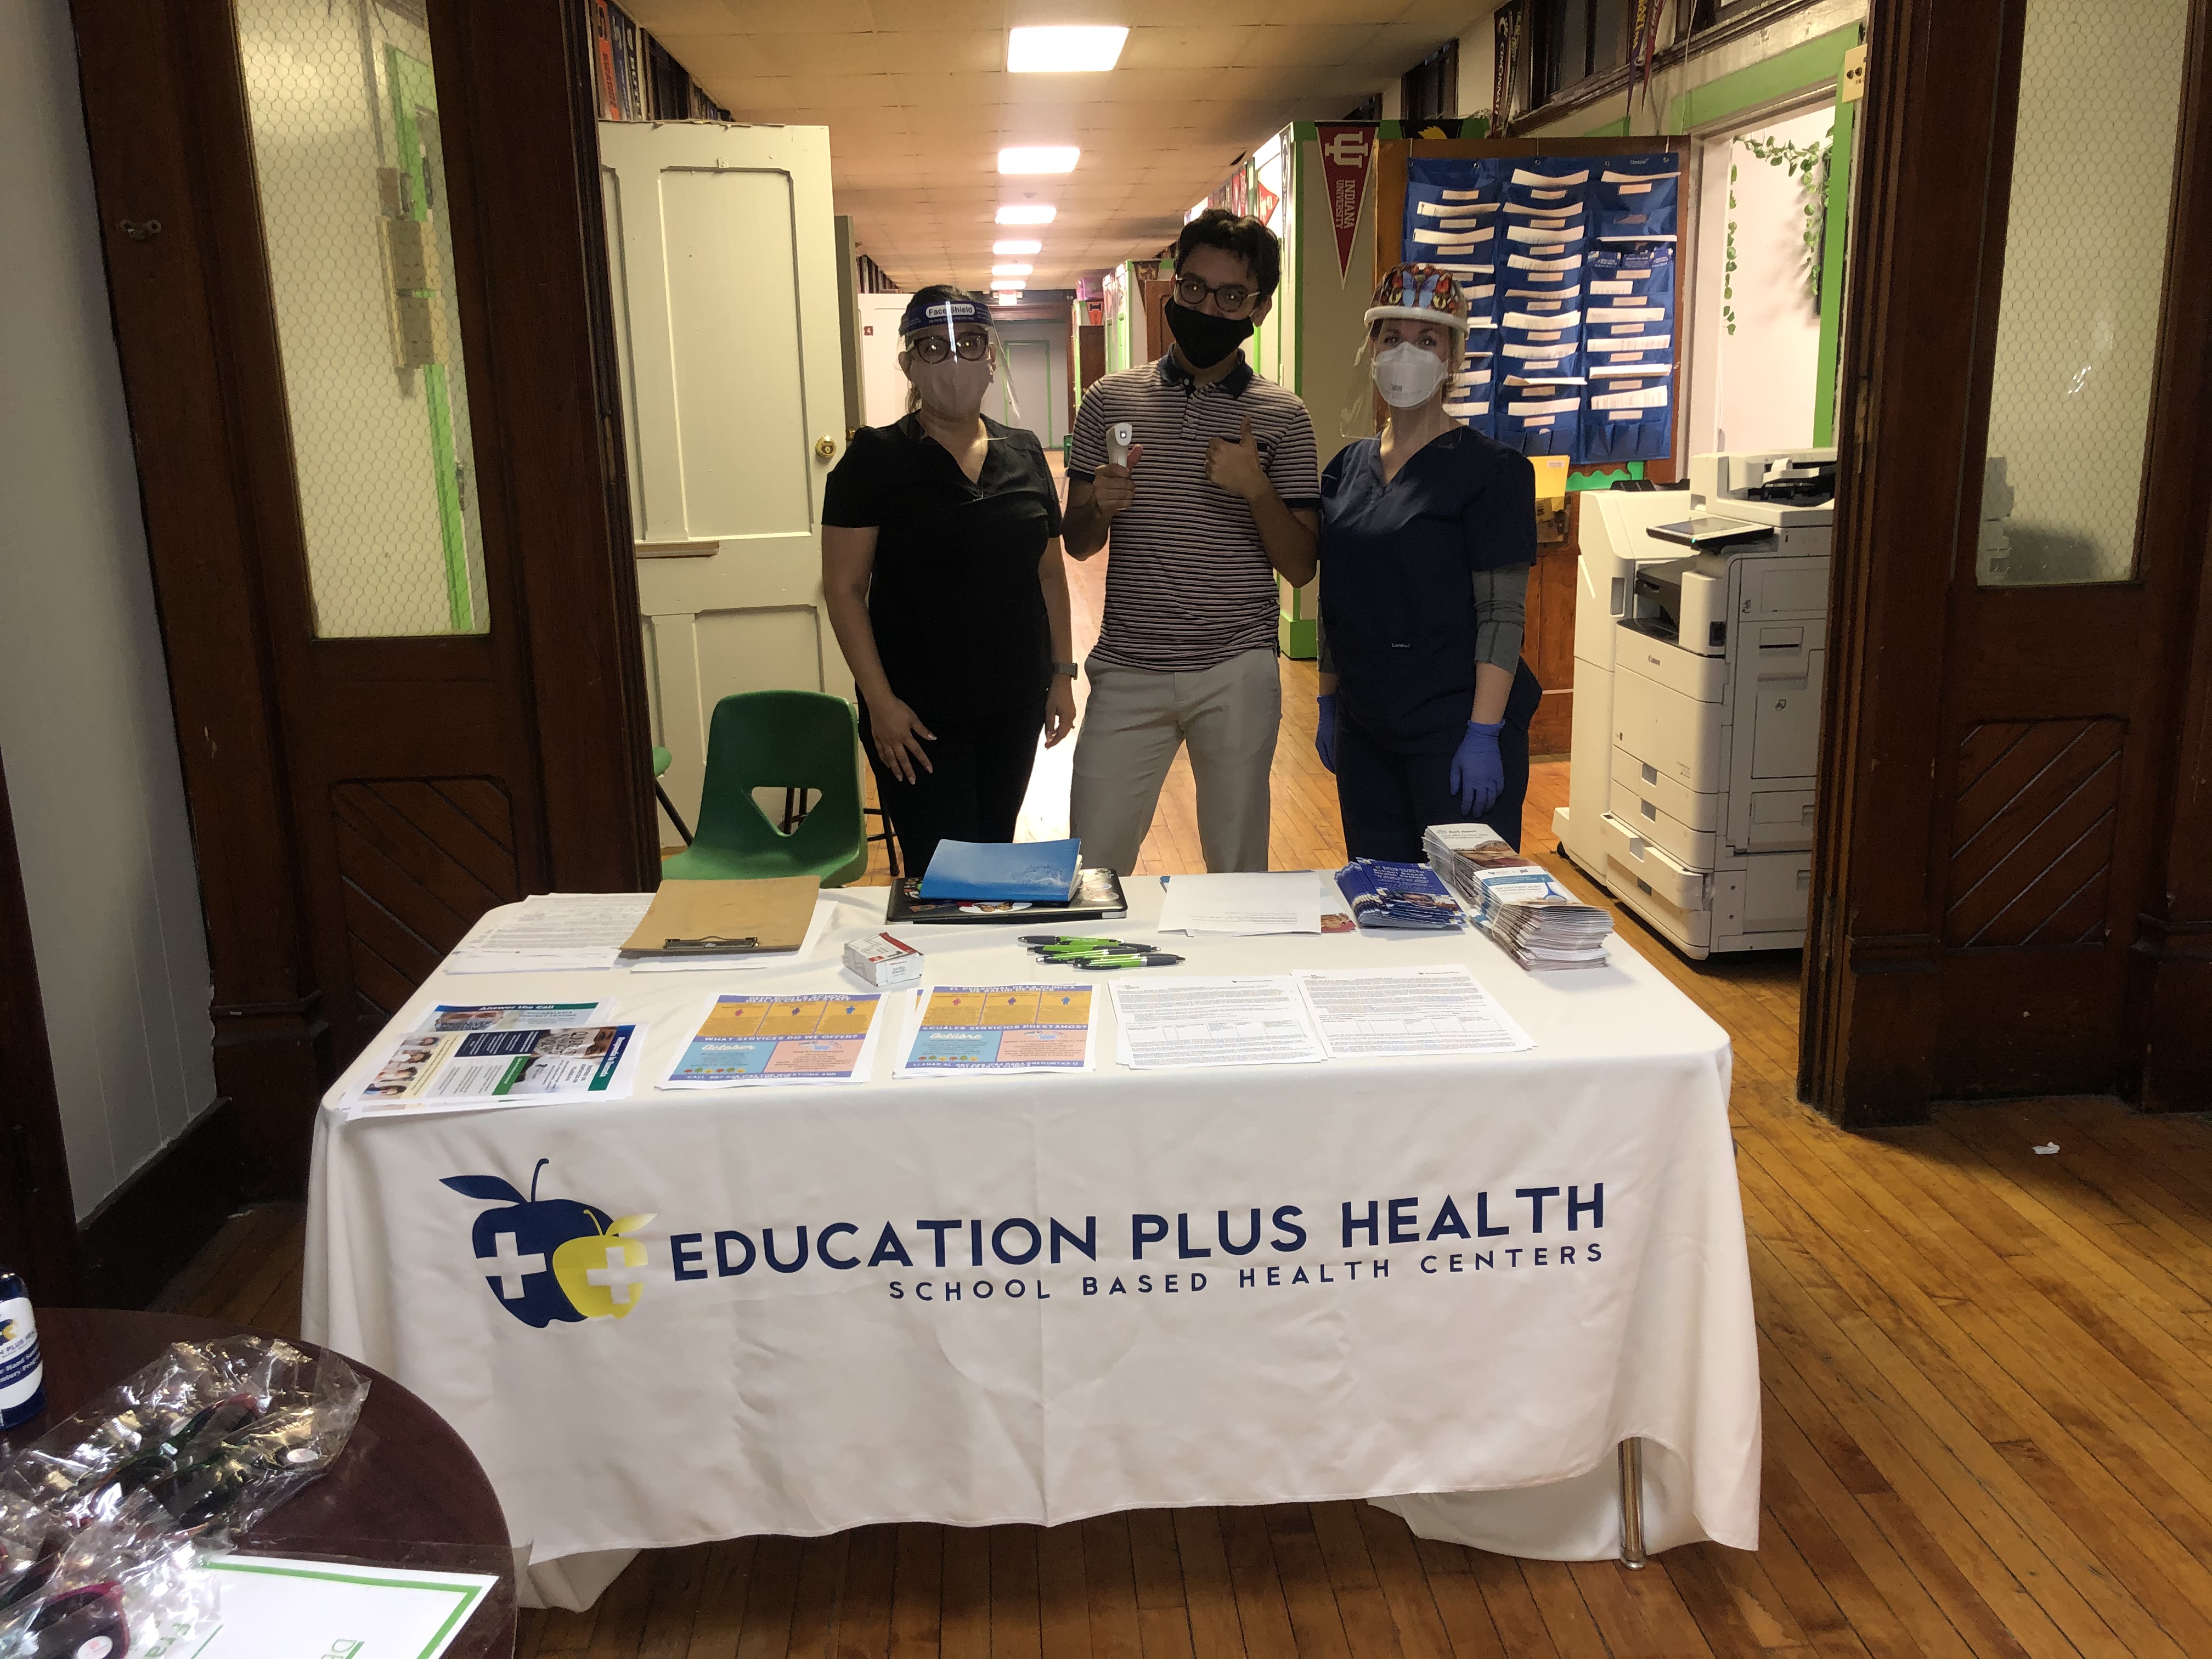 The School-Based Health Center Licensed Practical Nurse, Community Health Worker, and Nurse Practitioner prepared for community flu vaccination clinics at Deep Roots Charter School.